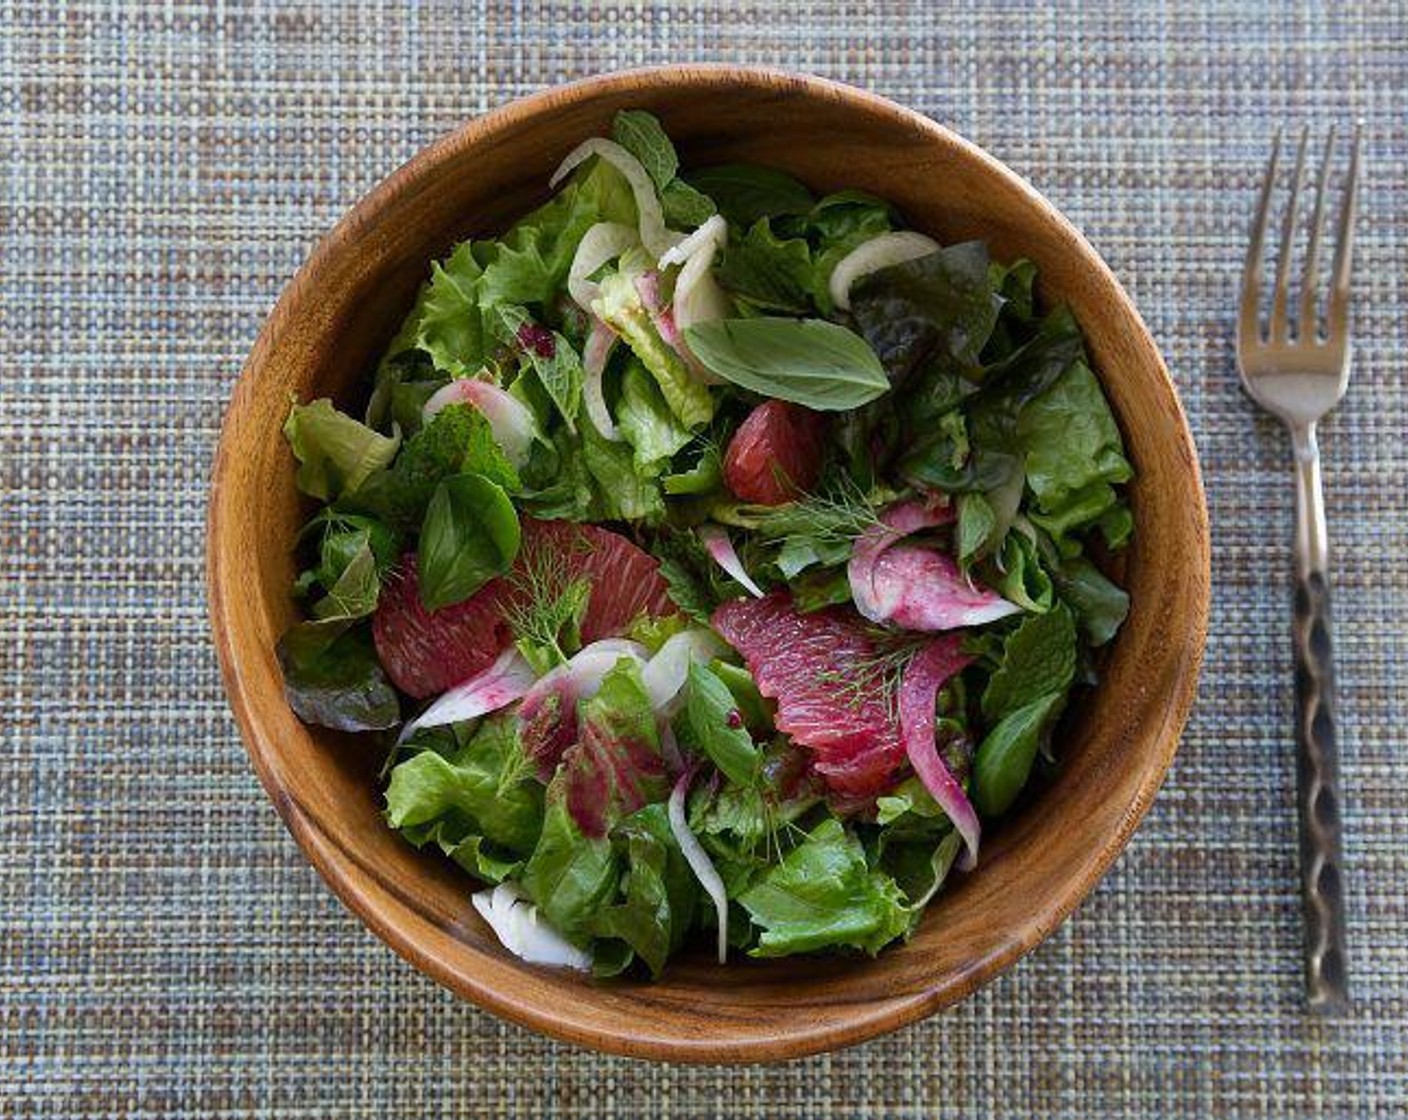 Grapefruit, Fennel, and Herb Salad with Cactus Pear Vinaigrette